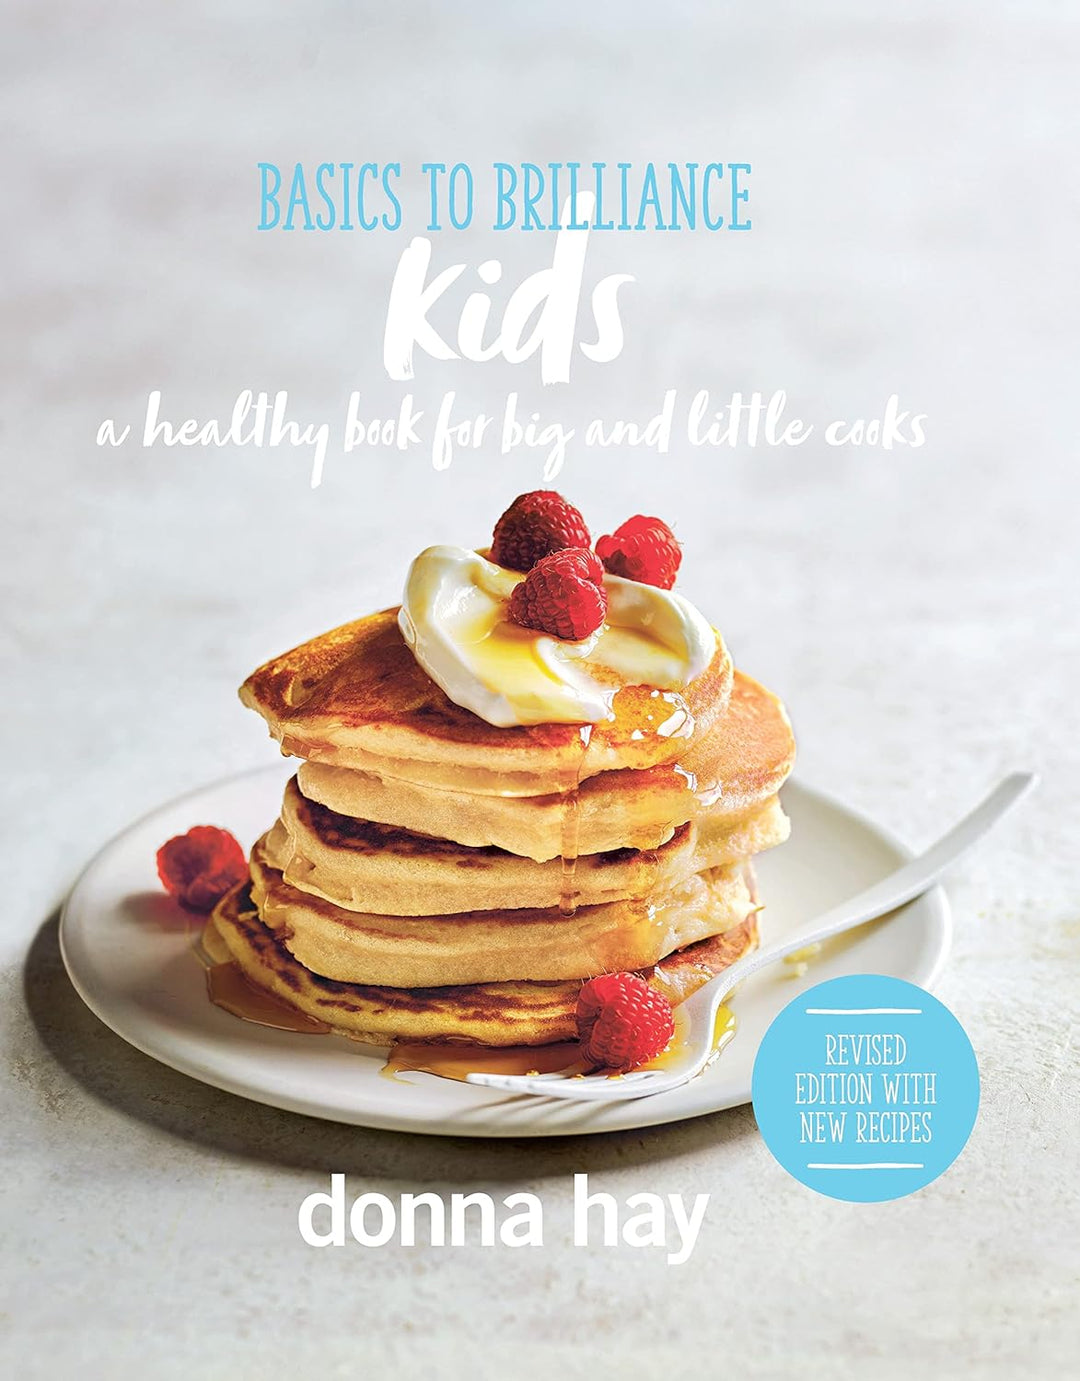 Basics to Brilliance Kids: A Healthy Book for Big and Little Cooks